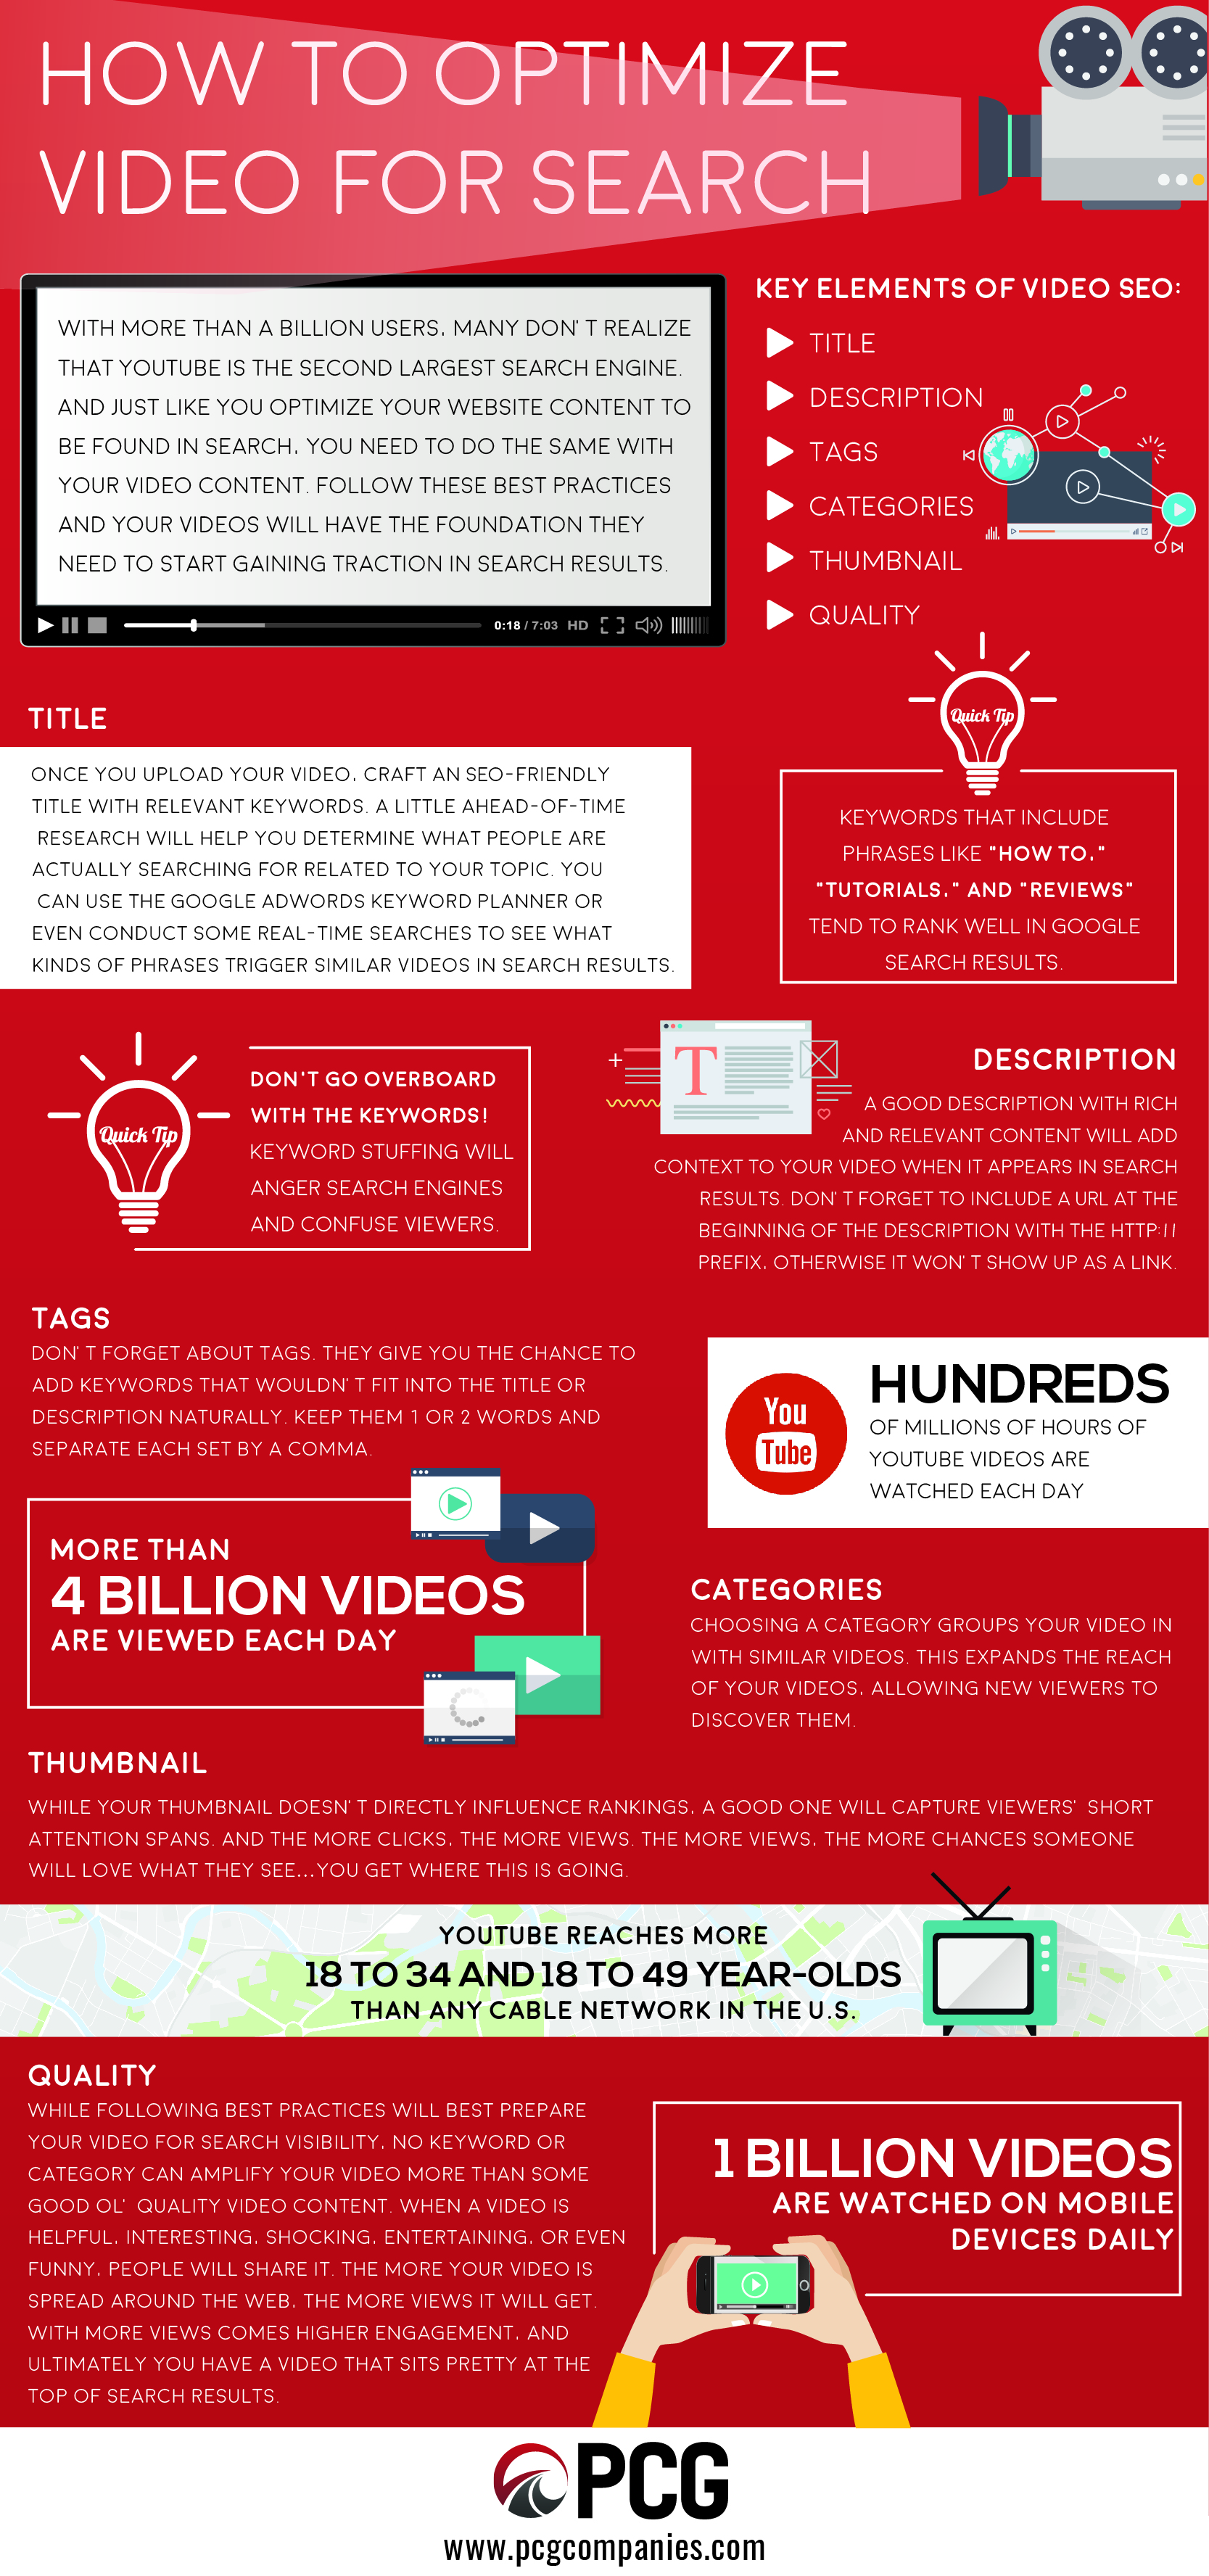 How to Optimize Video for Search infographic